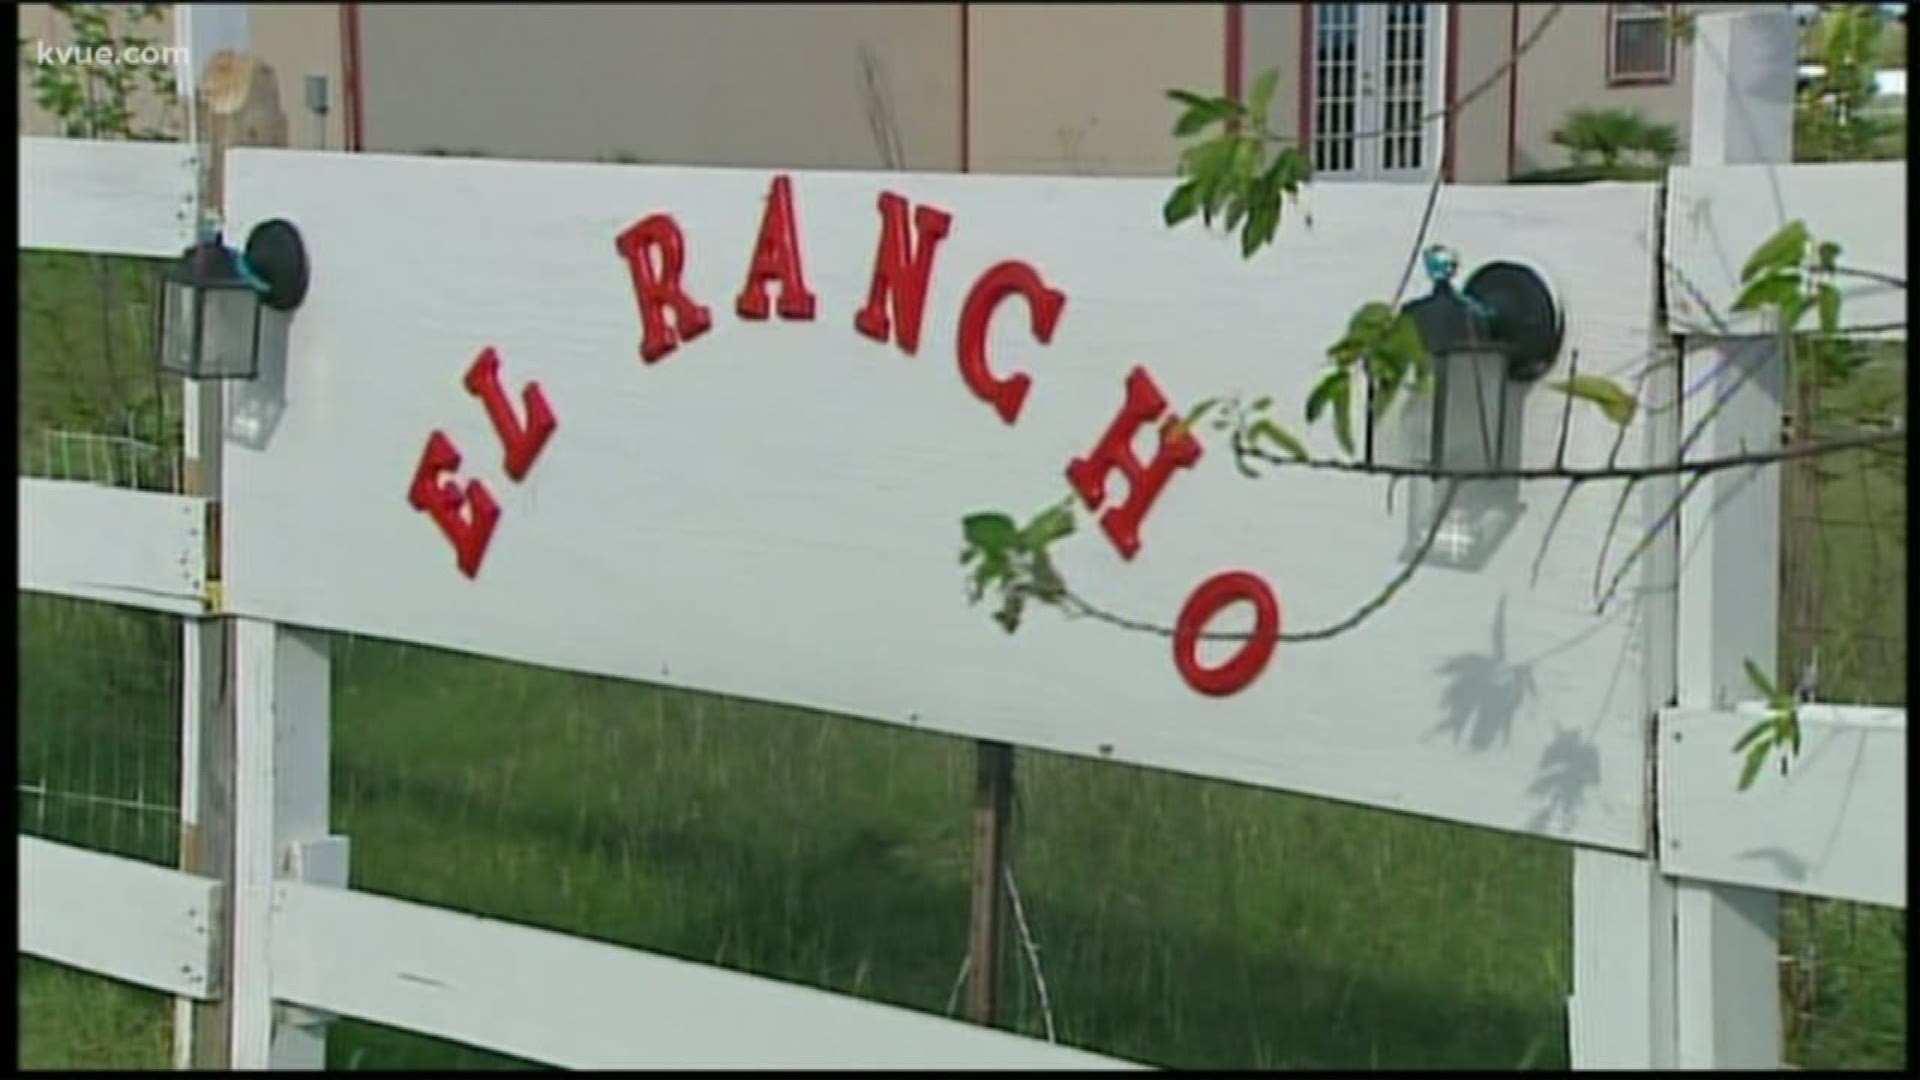 Matt's El Rancho is suing a Fort Worth restaurant for their alleged use of one of Matt's El Rancho's signature appetizers.